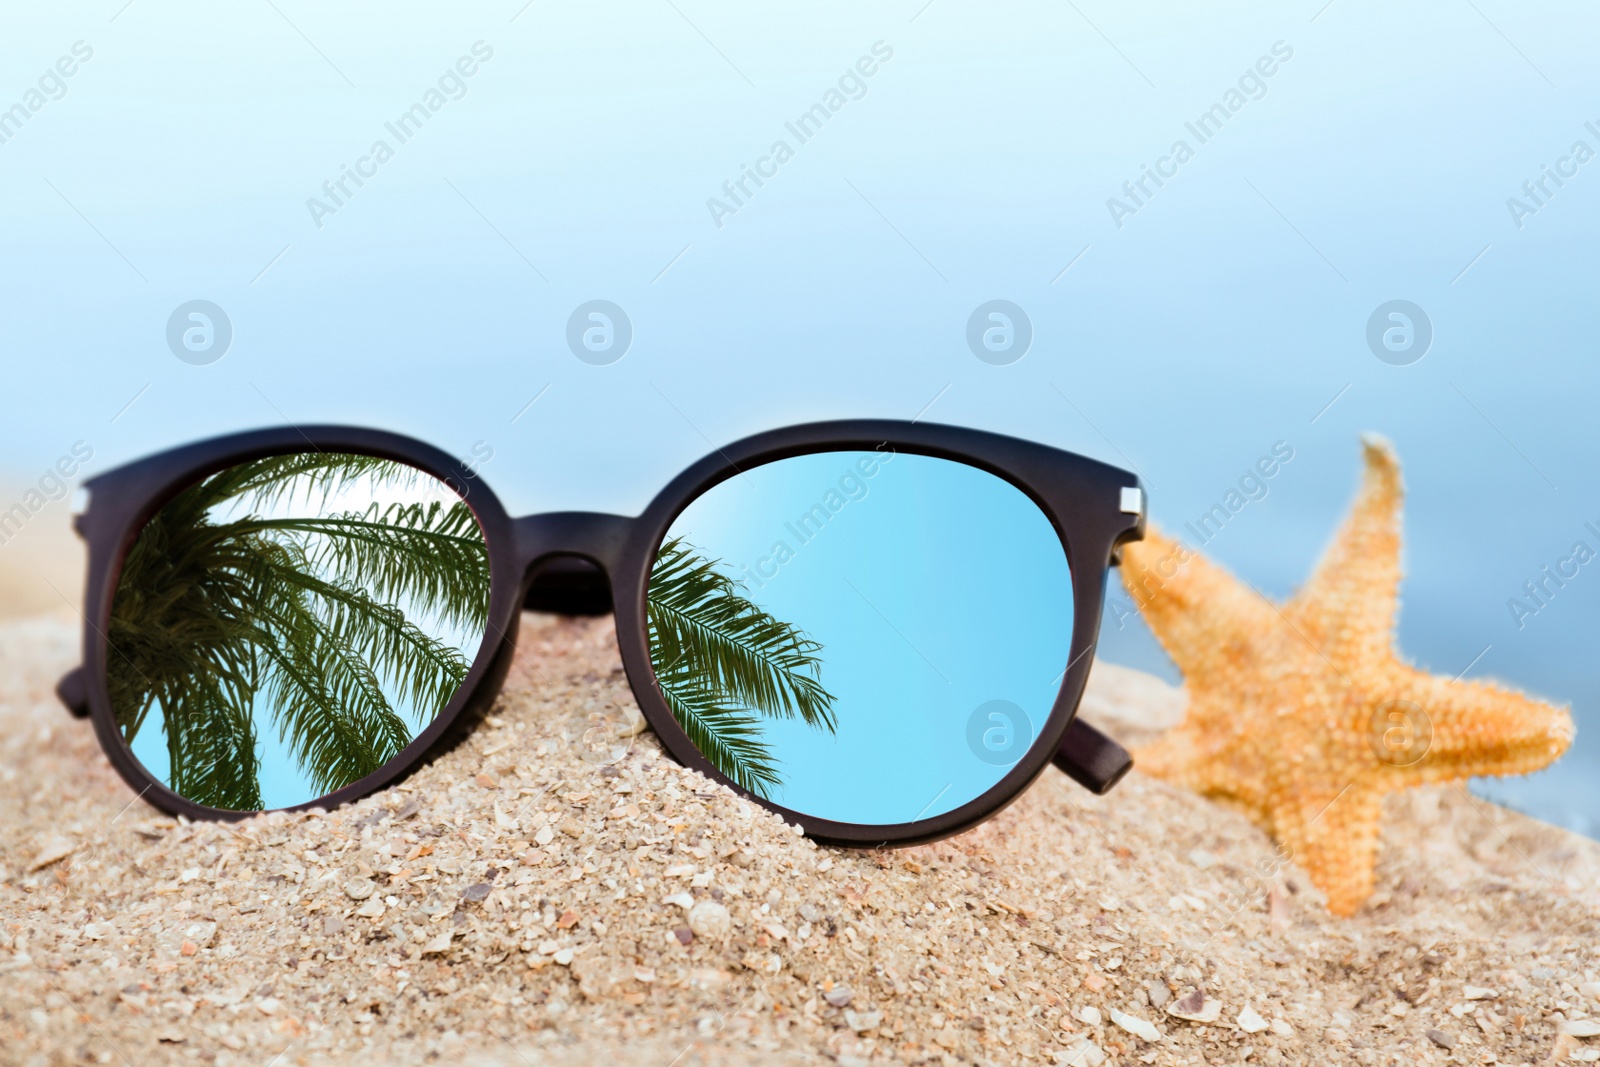 Image of Green palm leaves mirroring in sunglasses on sandy beach with starfish